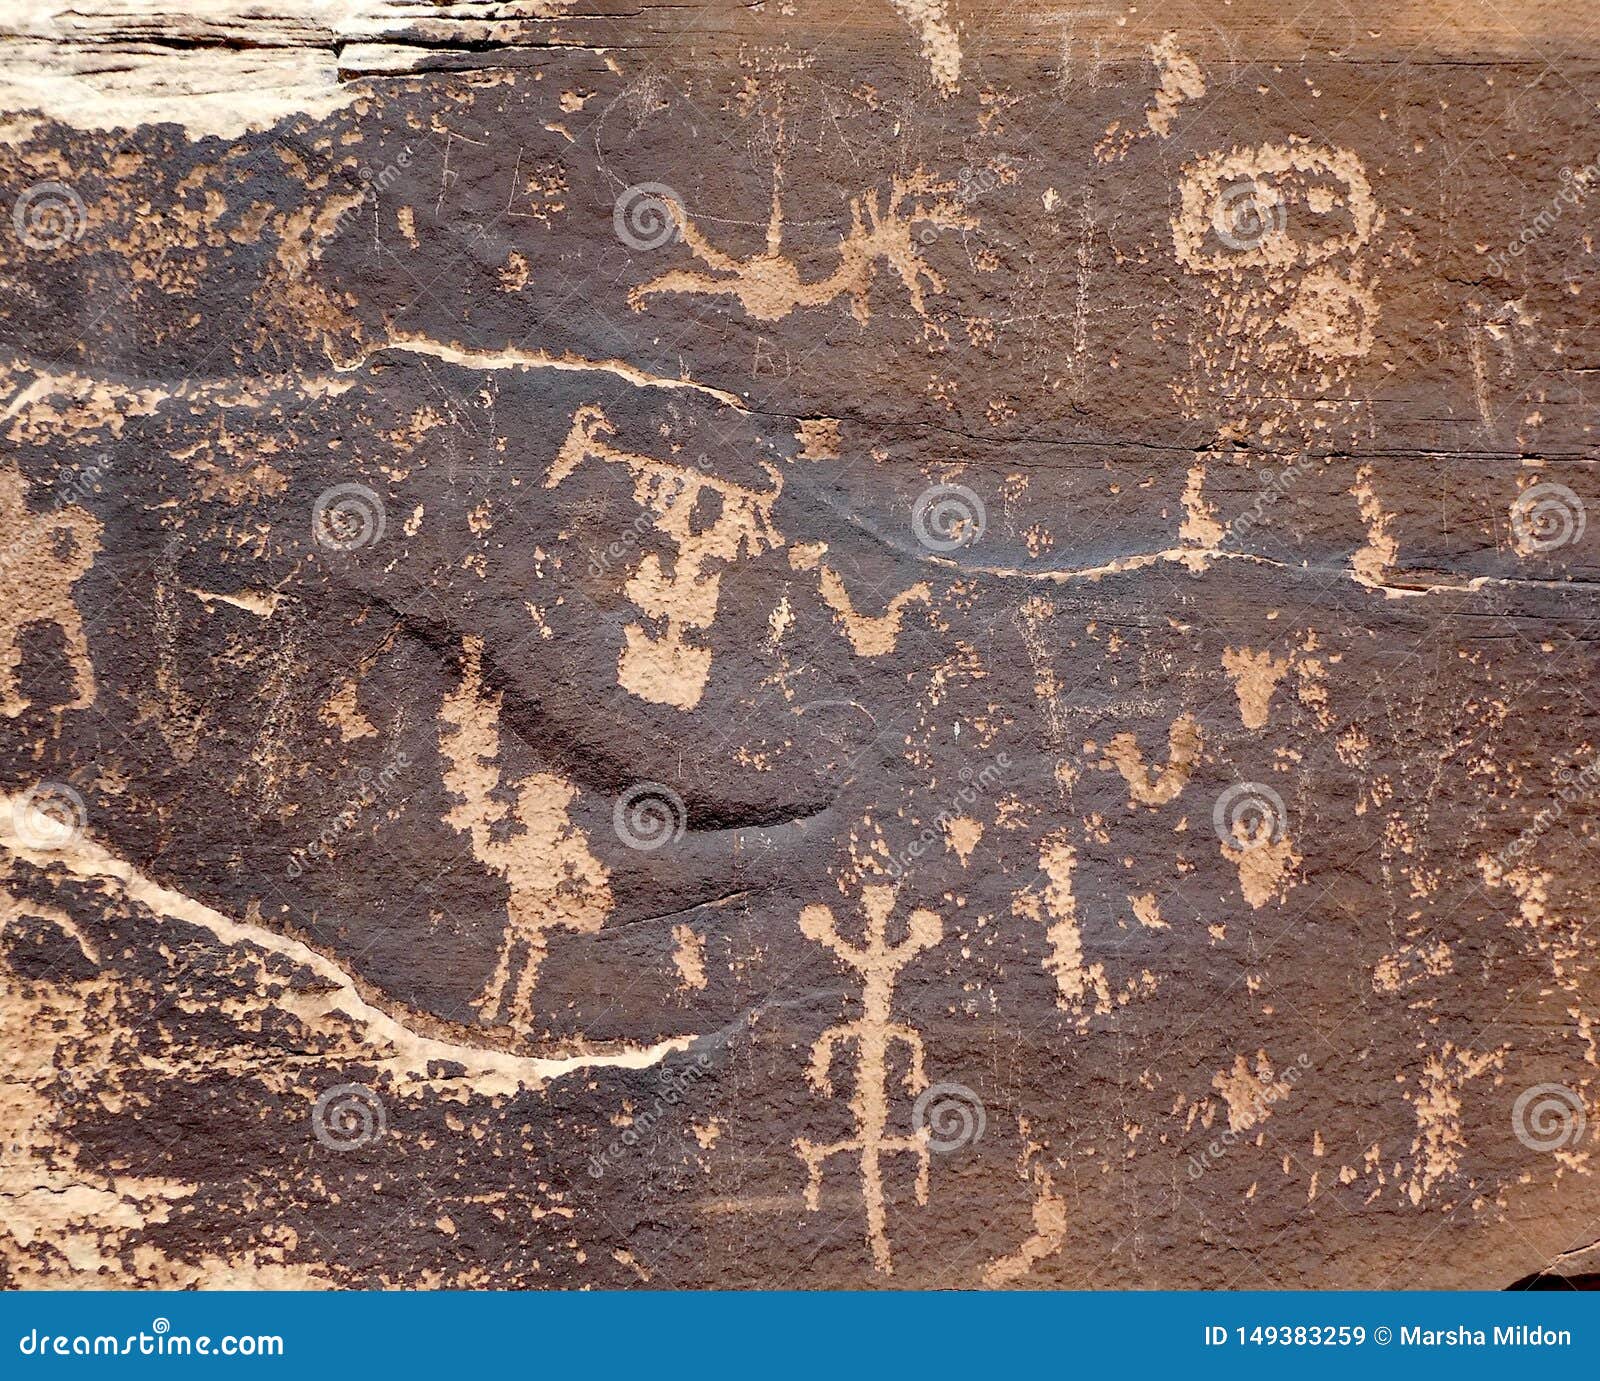 List 90+ Images in ancient petroglyphs and hieroglyphs, men were usually portrayed as Full HD, 2k, 4k